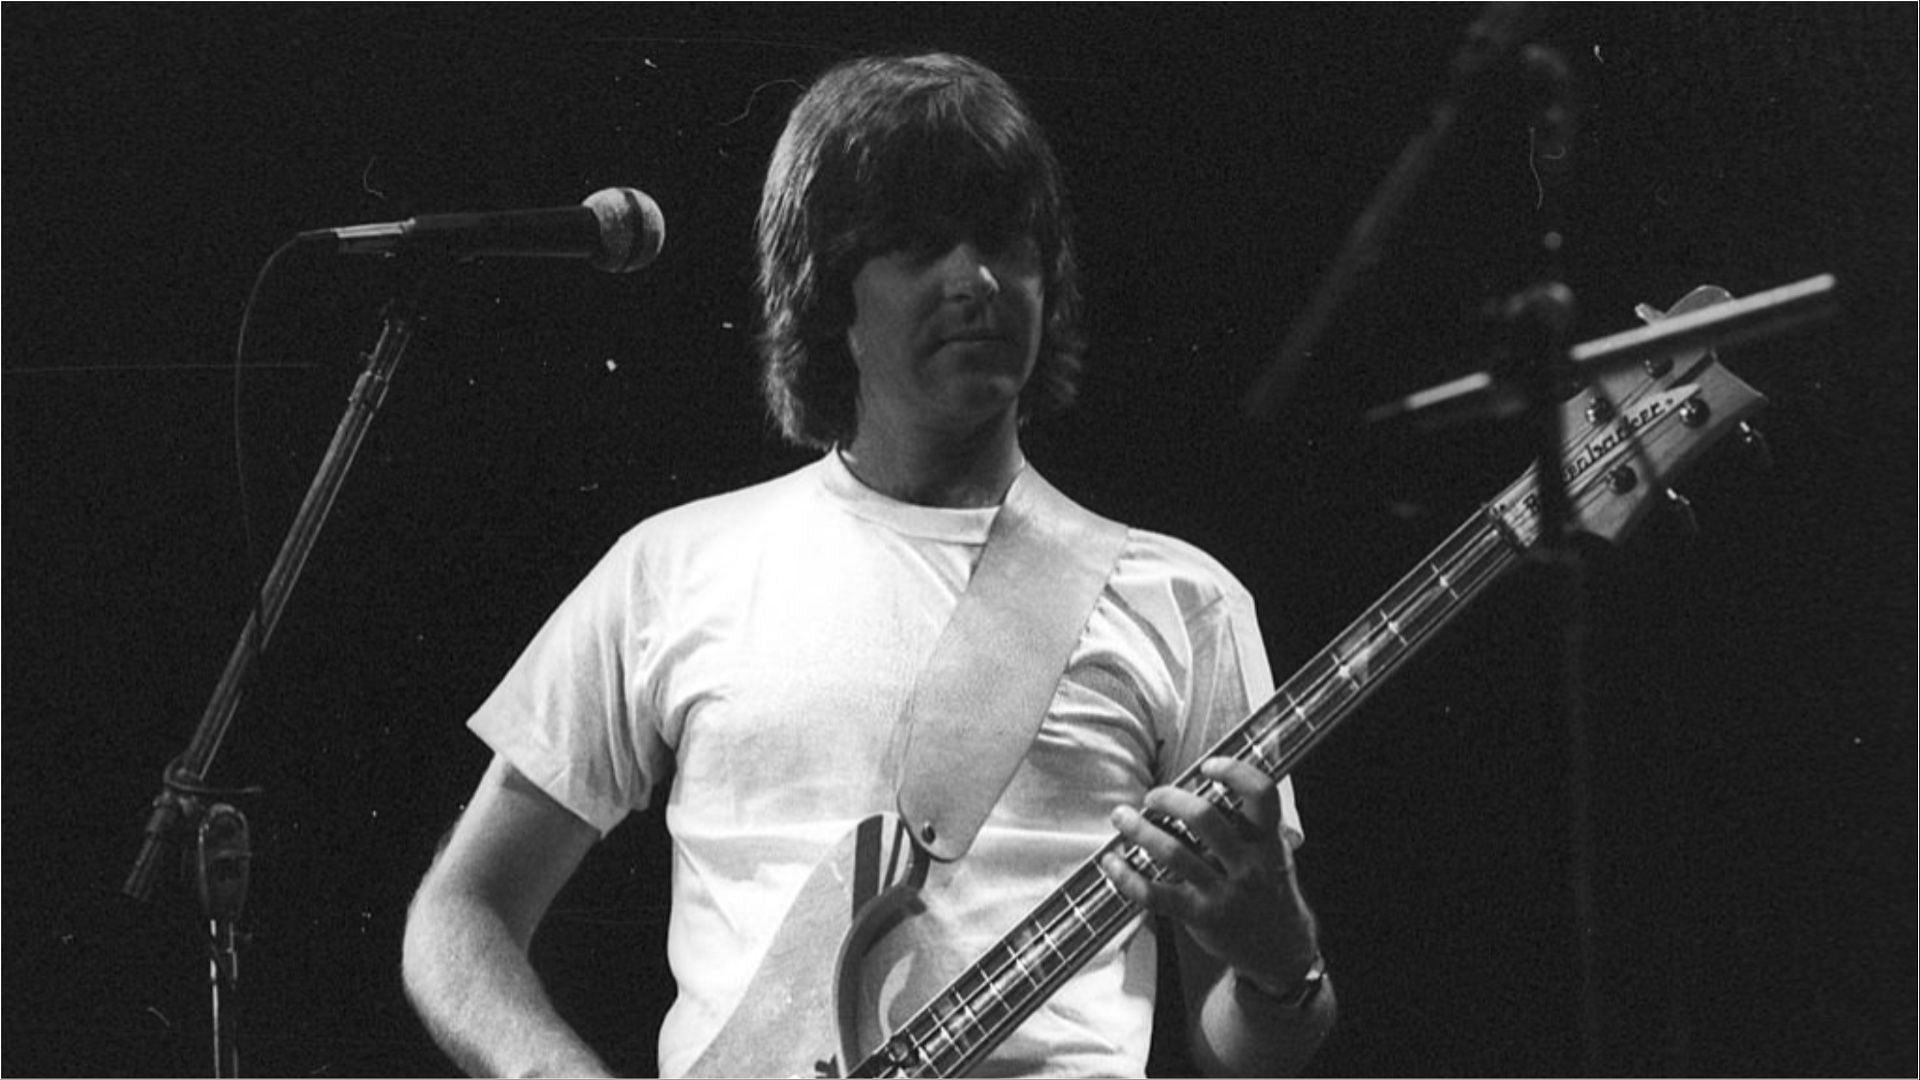 Randy Meisner was a founding member of the Eagles (Image via Michael Ochs Archives/Getty Images)